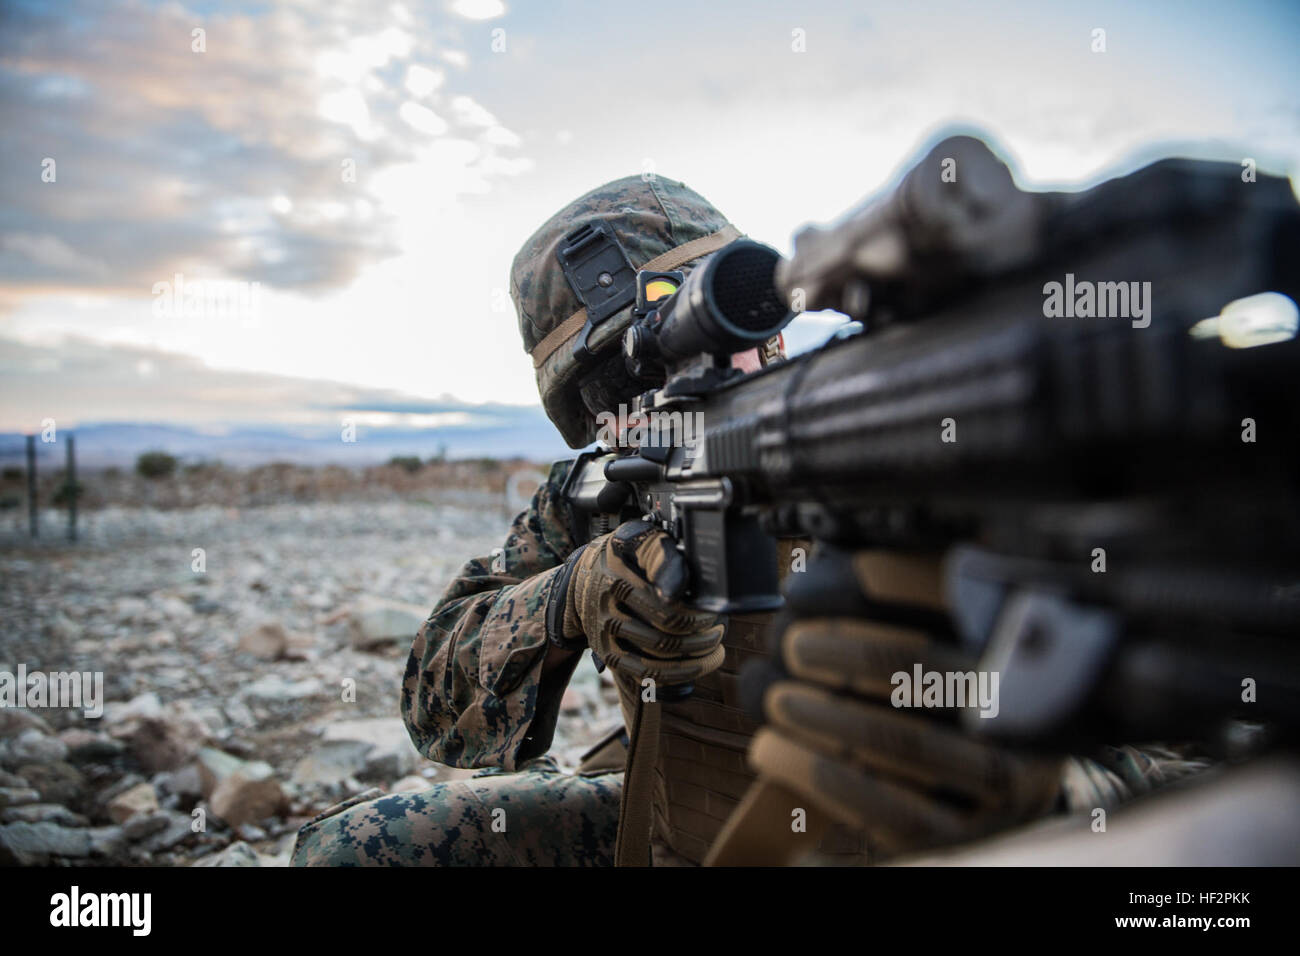 U.S. Marine Lance Cpl. Trent Martin aims in on a target during a combined arms exercise aboard Marine Corps Air Ground Combat Center, Twentynine Palms, Calif., Dec. 12, 2014. Martin is a rifleman with Battalion Landing Team 3rd Battalion, 1st Marine Regiment, 15th Marine Expeditionary Unit. BLT 3/1 conducted this training concurrent with the 15th MEU’s realistic urban training.  RUT prepares the 15th MEU’s Marines for their upcoming deployment, enhancing their combat skills in environments similar to those they may find in future missions. (U.S. Marine Corps Photo by Sgt. Emmanuel Ramos/Releas Stock Photo